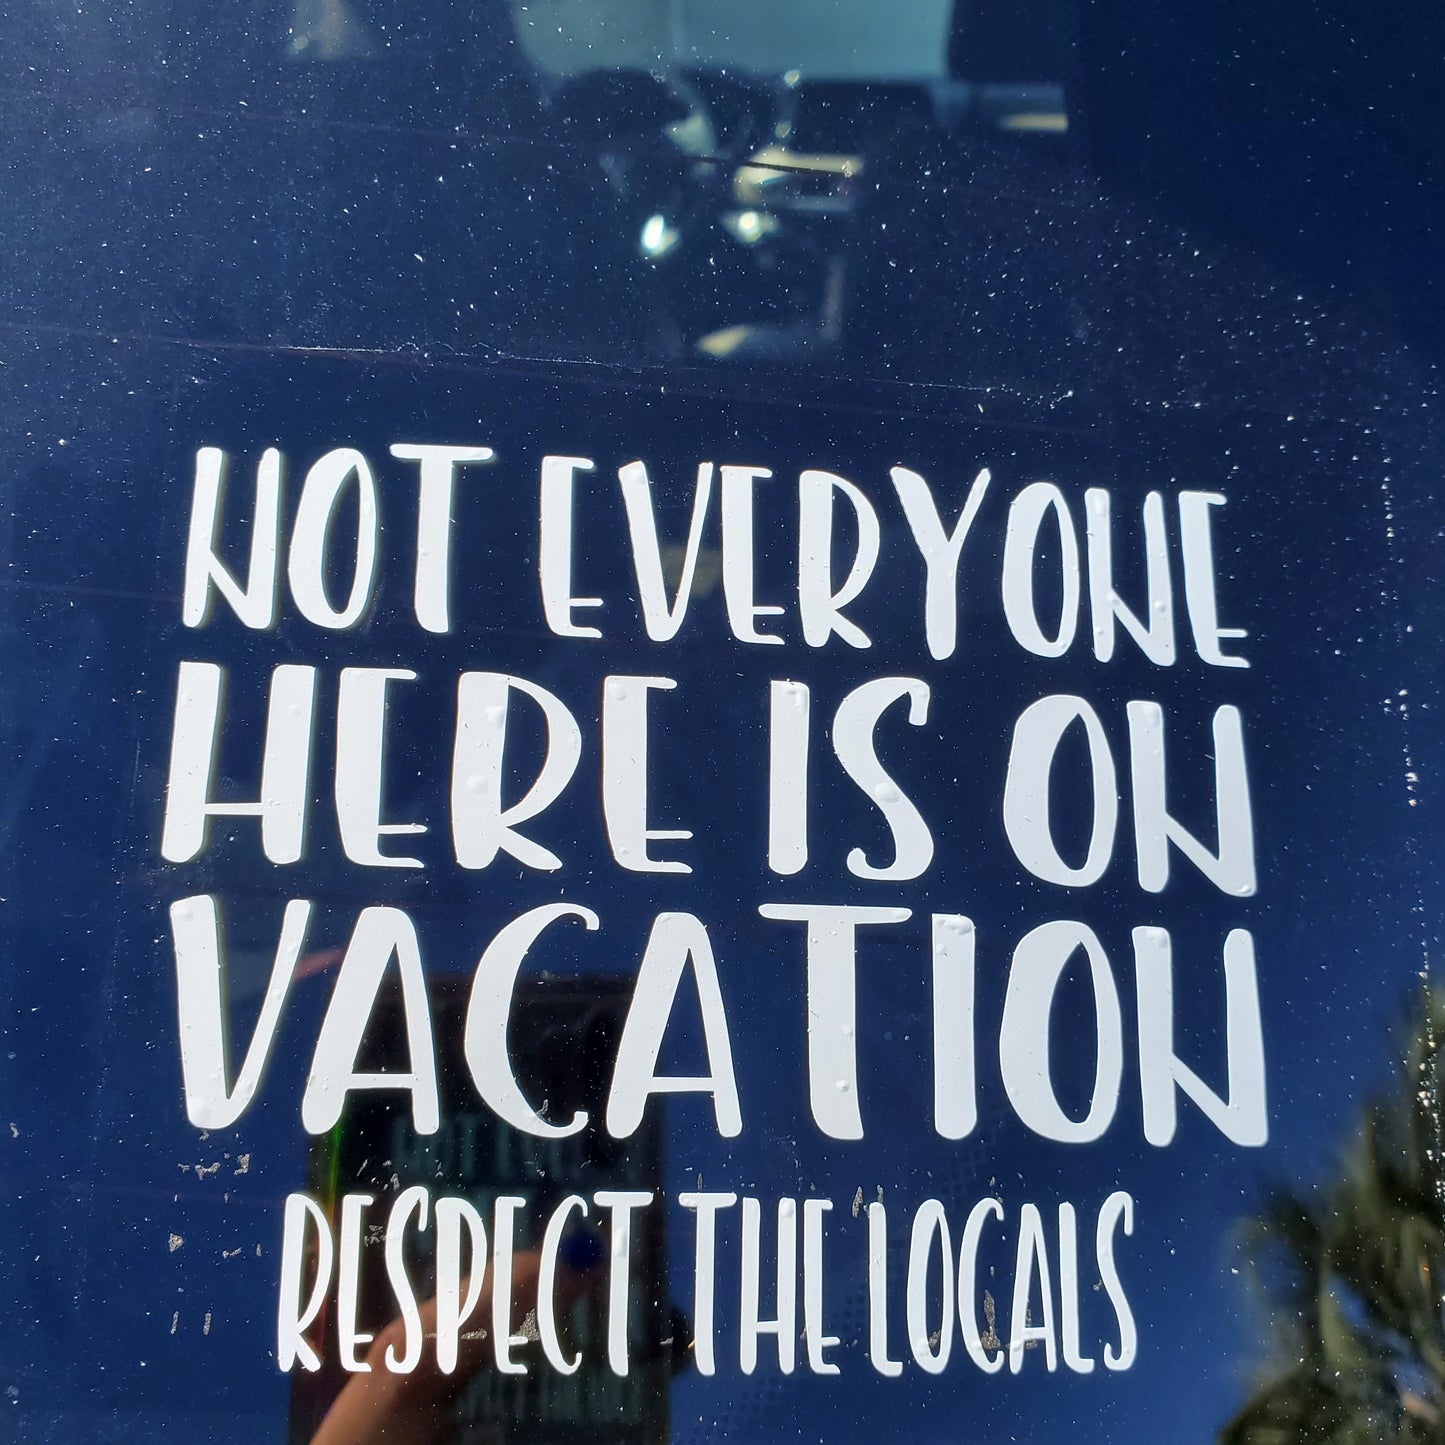 Not everyone is on vacation decal